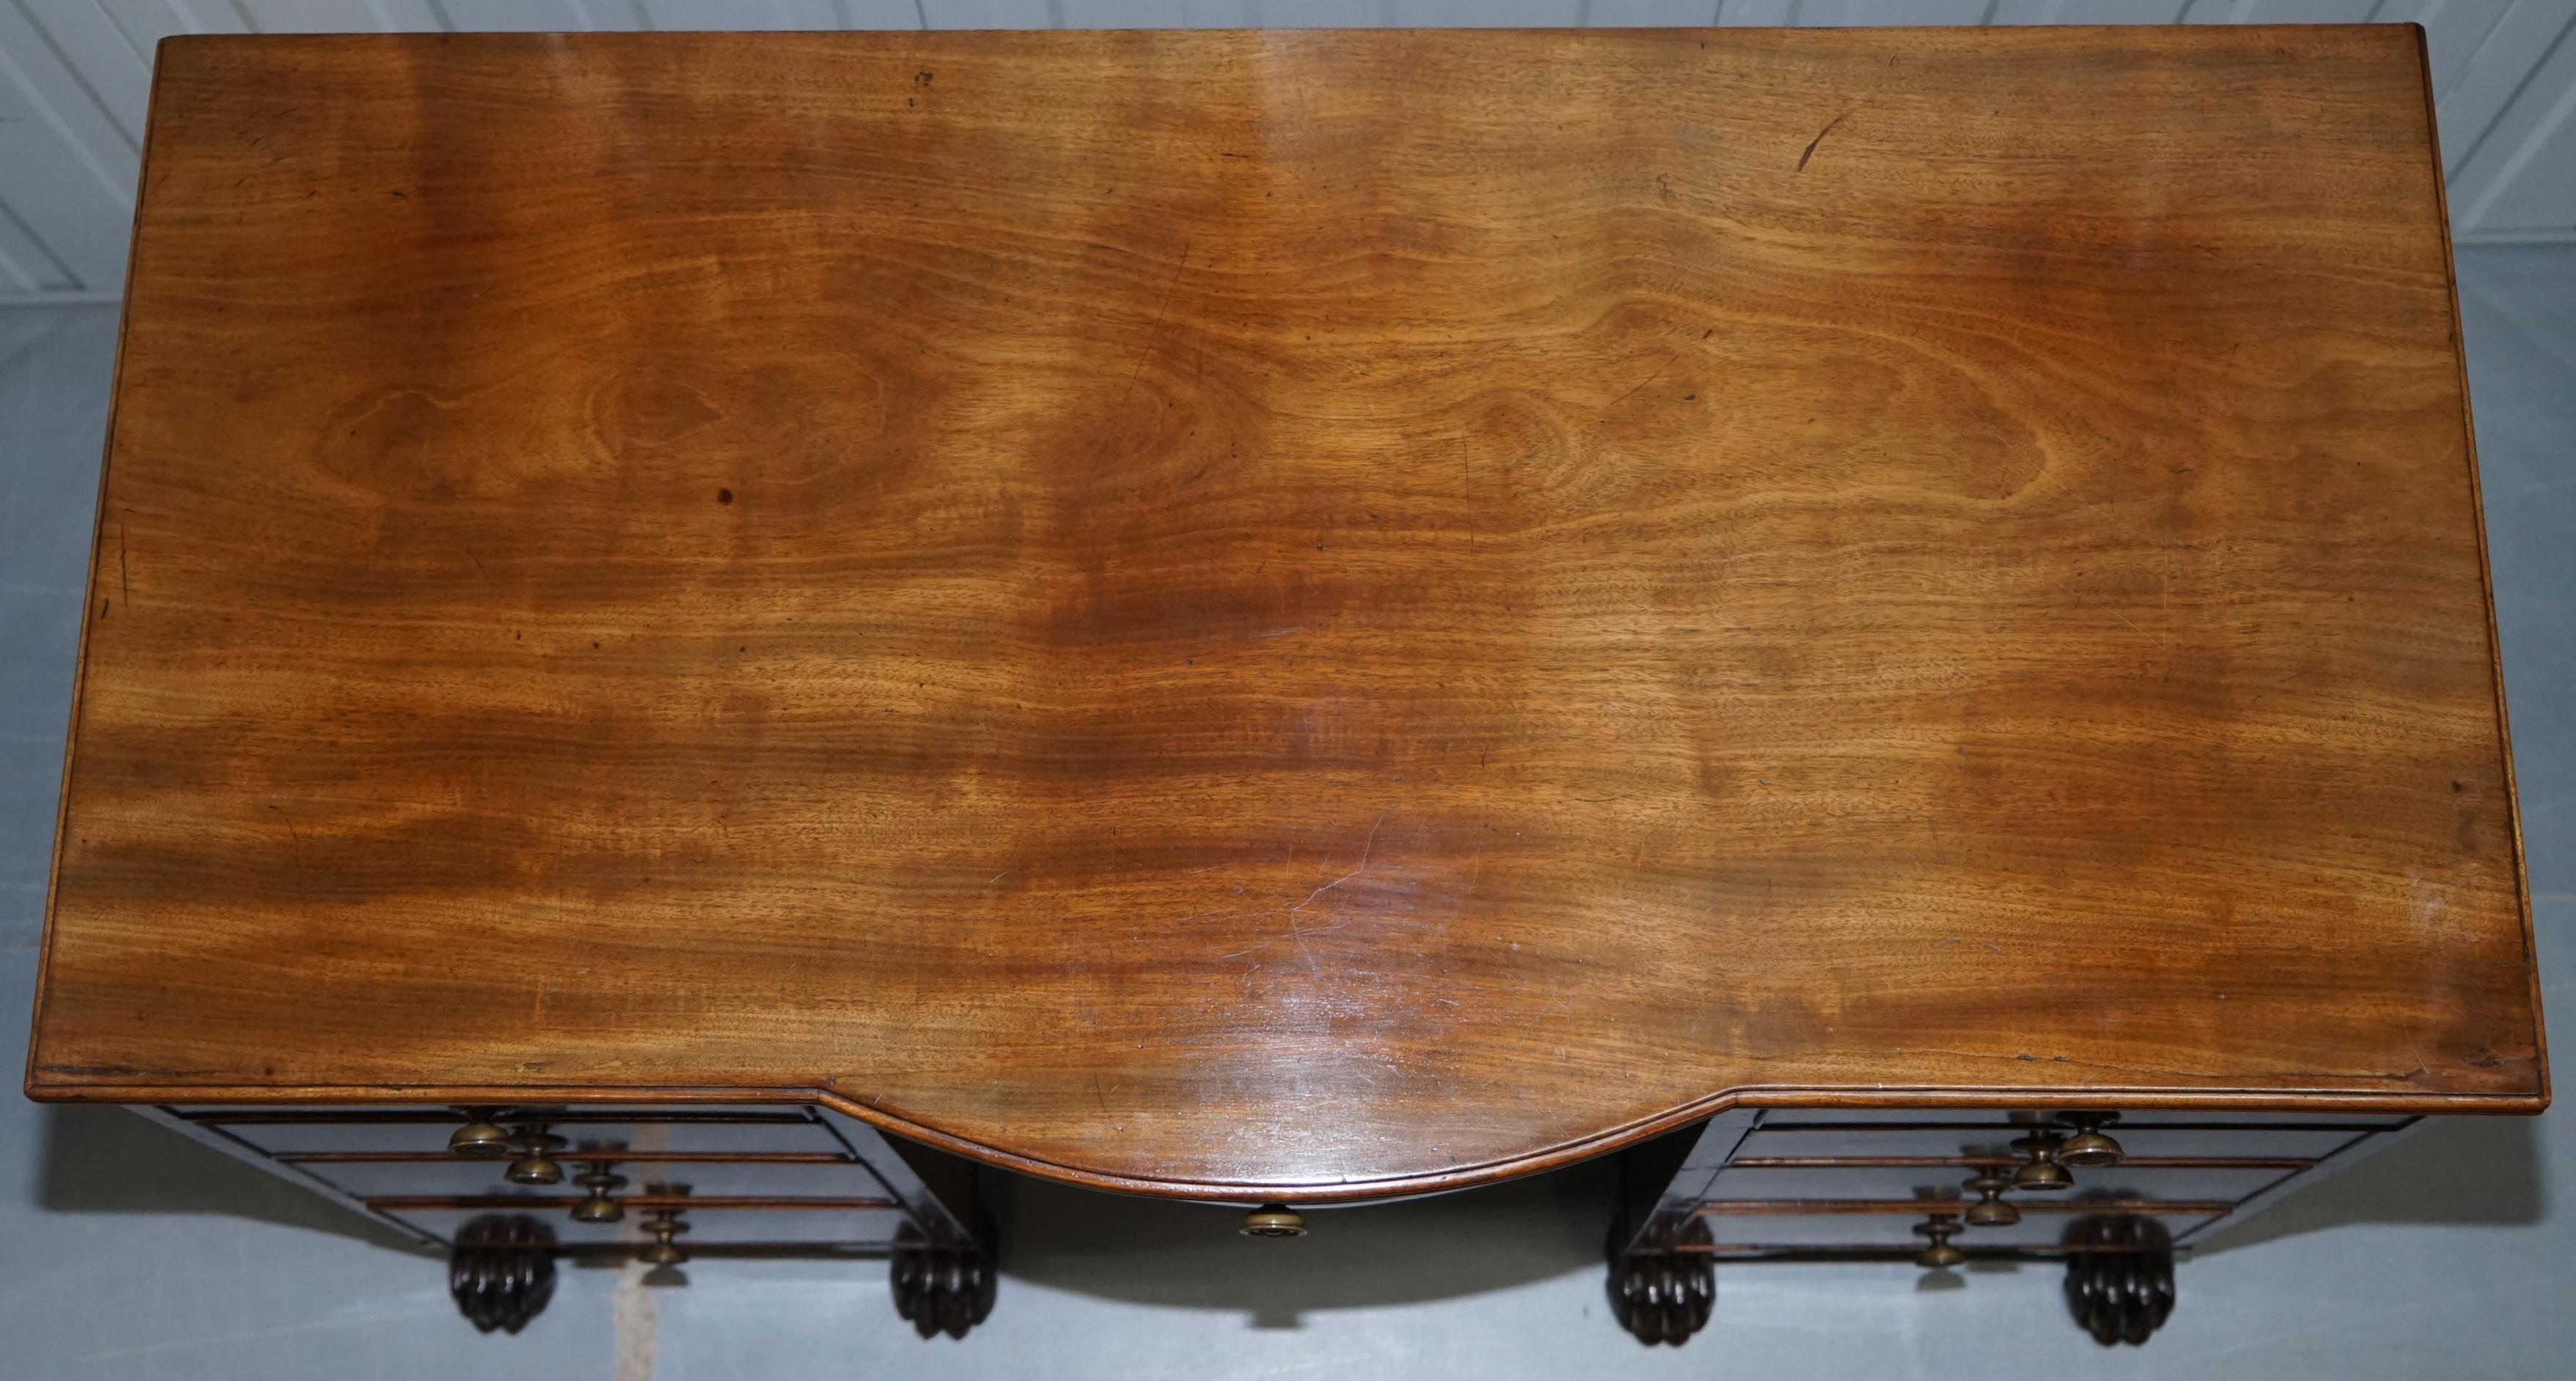 Hand-Carved Exquisite Regency Period 1815 Hardwood Kneehole Desk with Lion Hairy Paw Feet For Sale